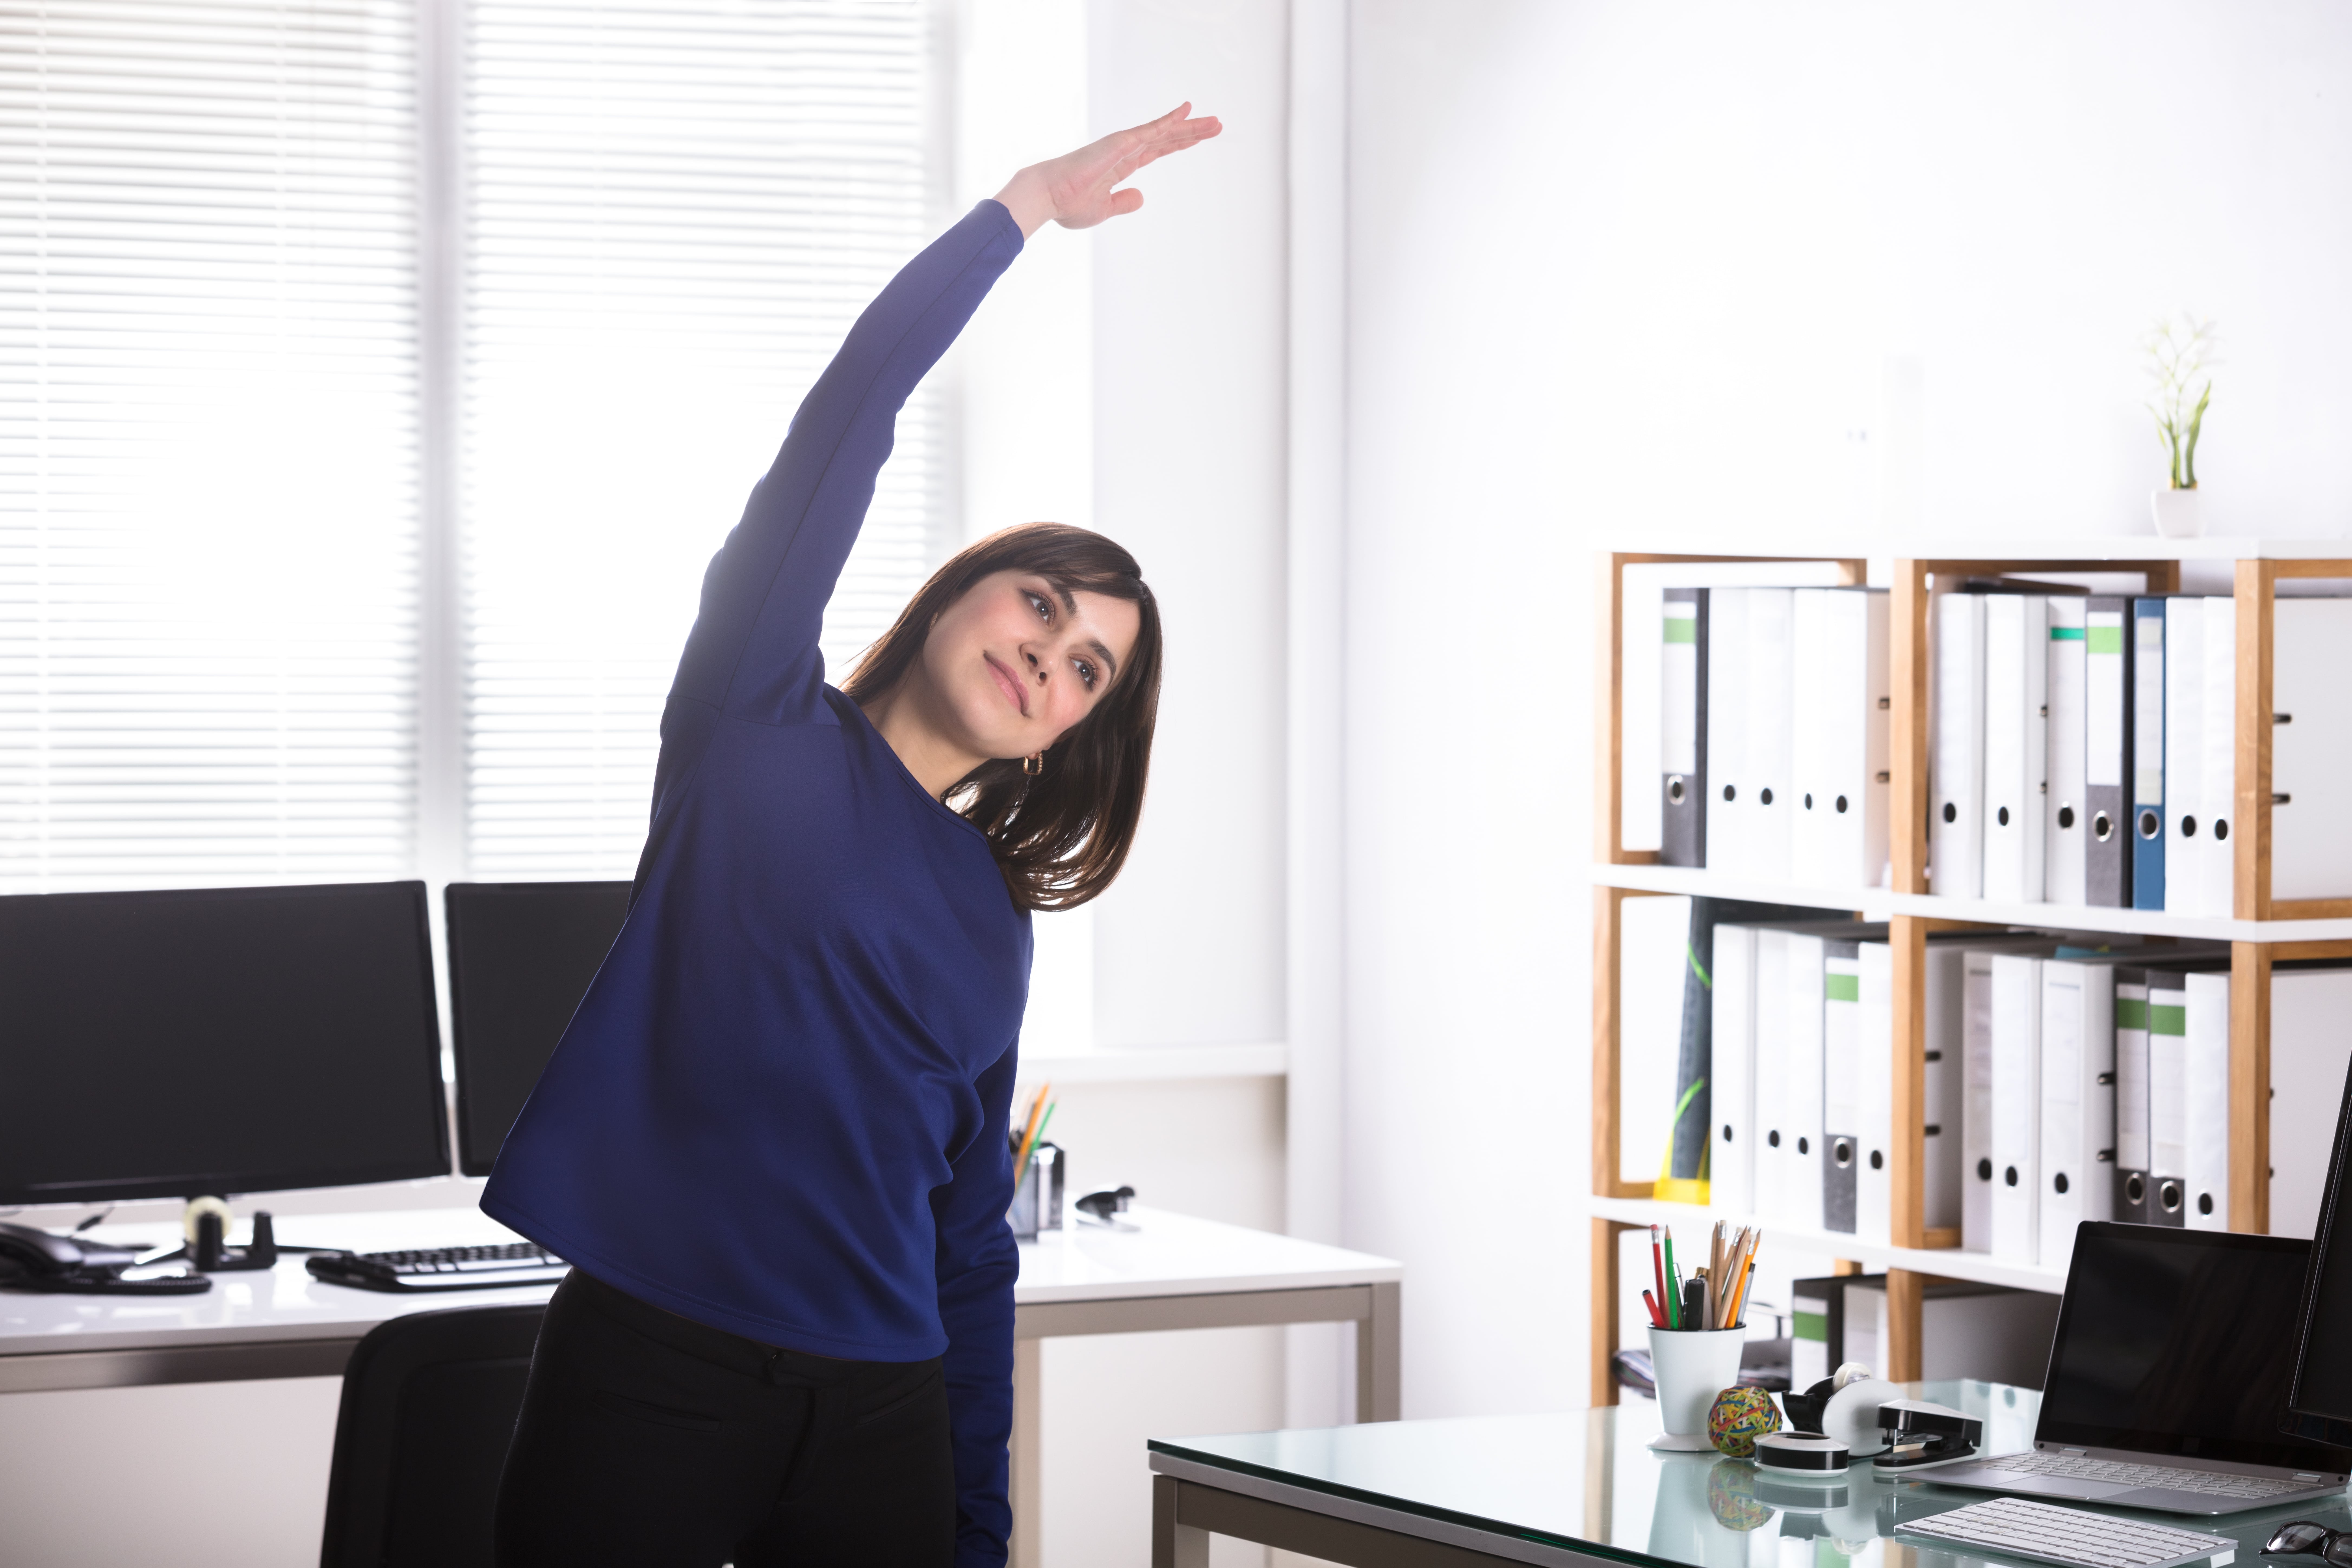 Easy stretches, exercises and yoga you can do at your desk or work